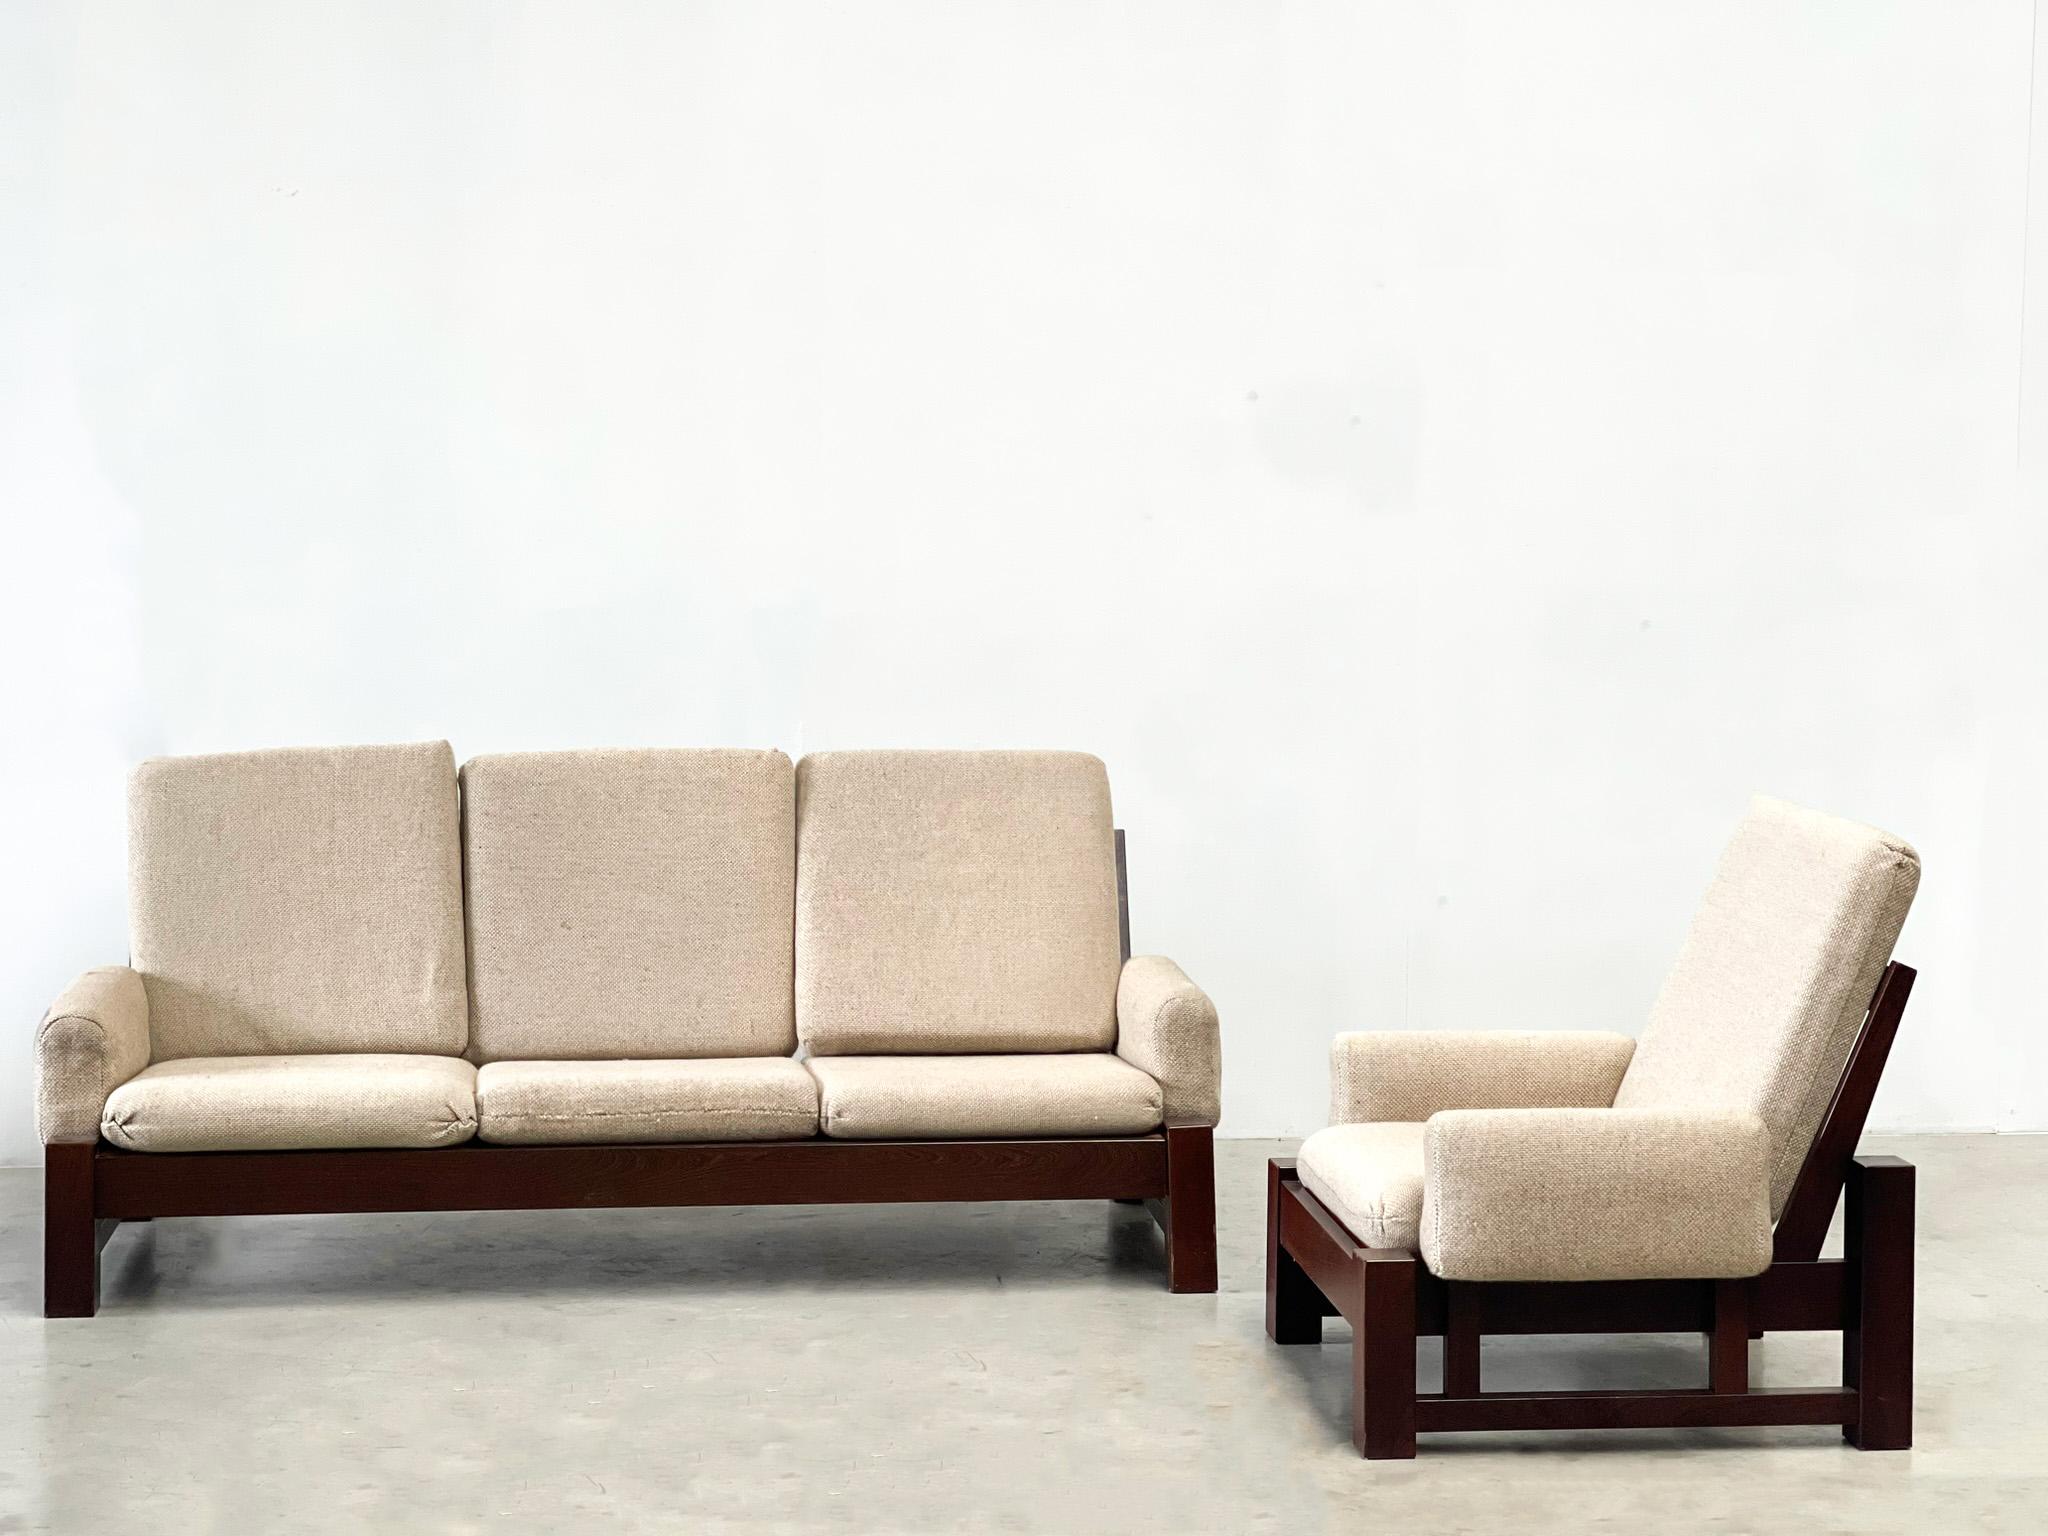 Very nice sofa set. This set is probably made in the Netherlands or Germany. They have a very brutalist frame and heavy frame. This gives them a very good look and fit perfectly in a modern interior. They still have the original fabric and this is